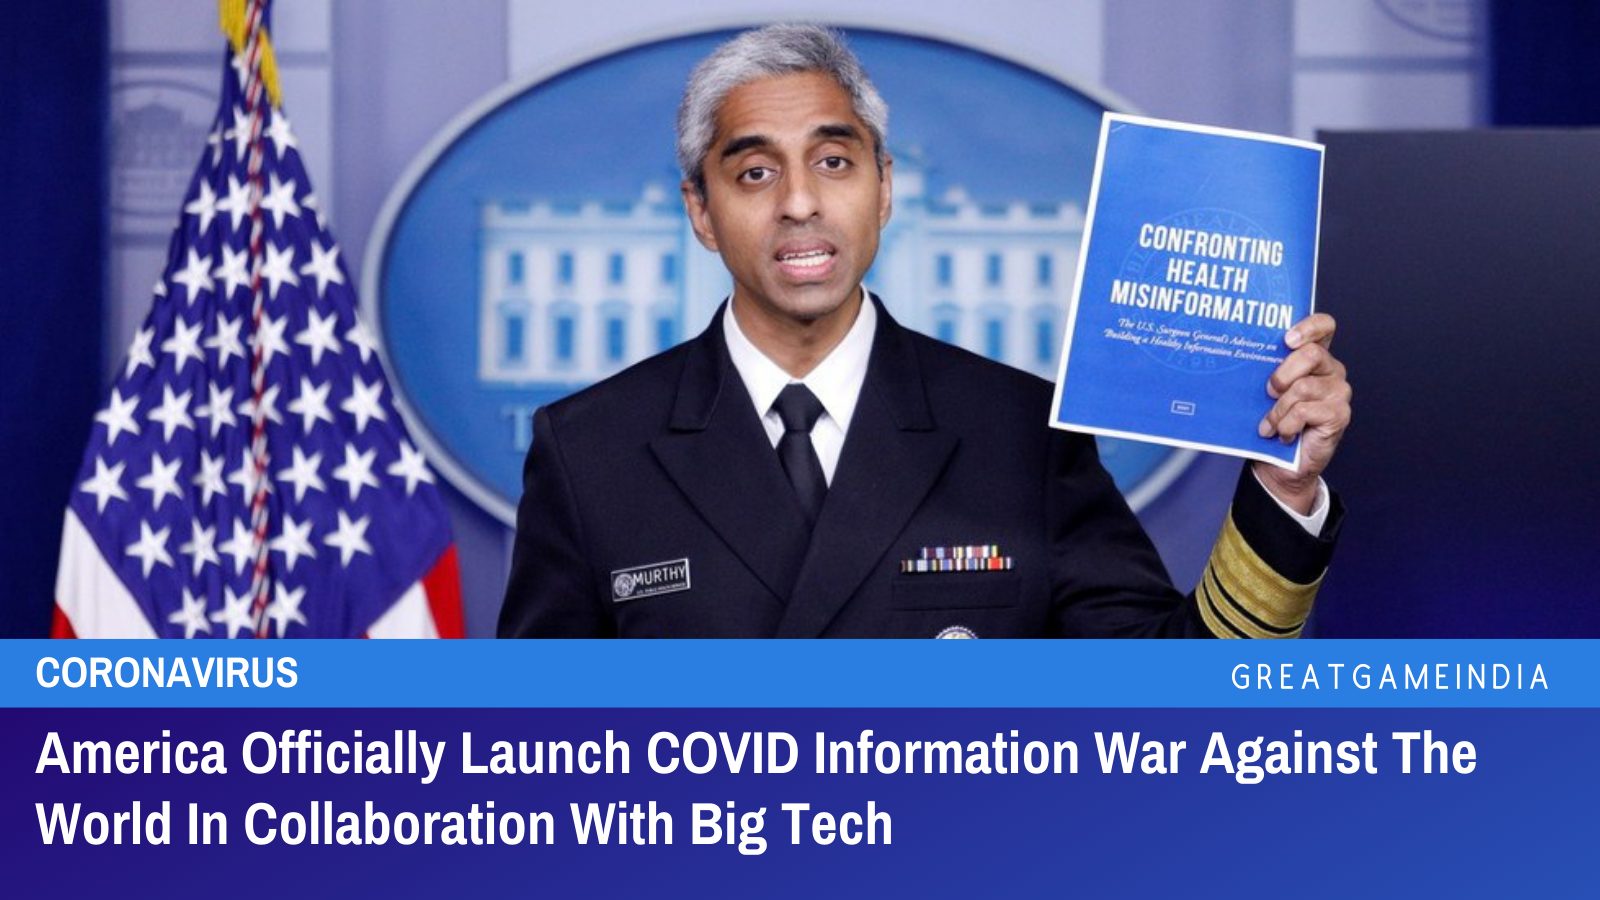 America Officially Launch COVID Information War Against The World In Collaboration With Big Tech